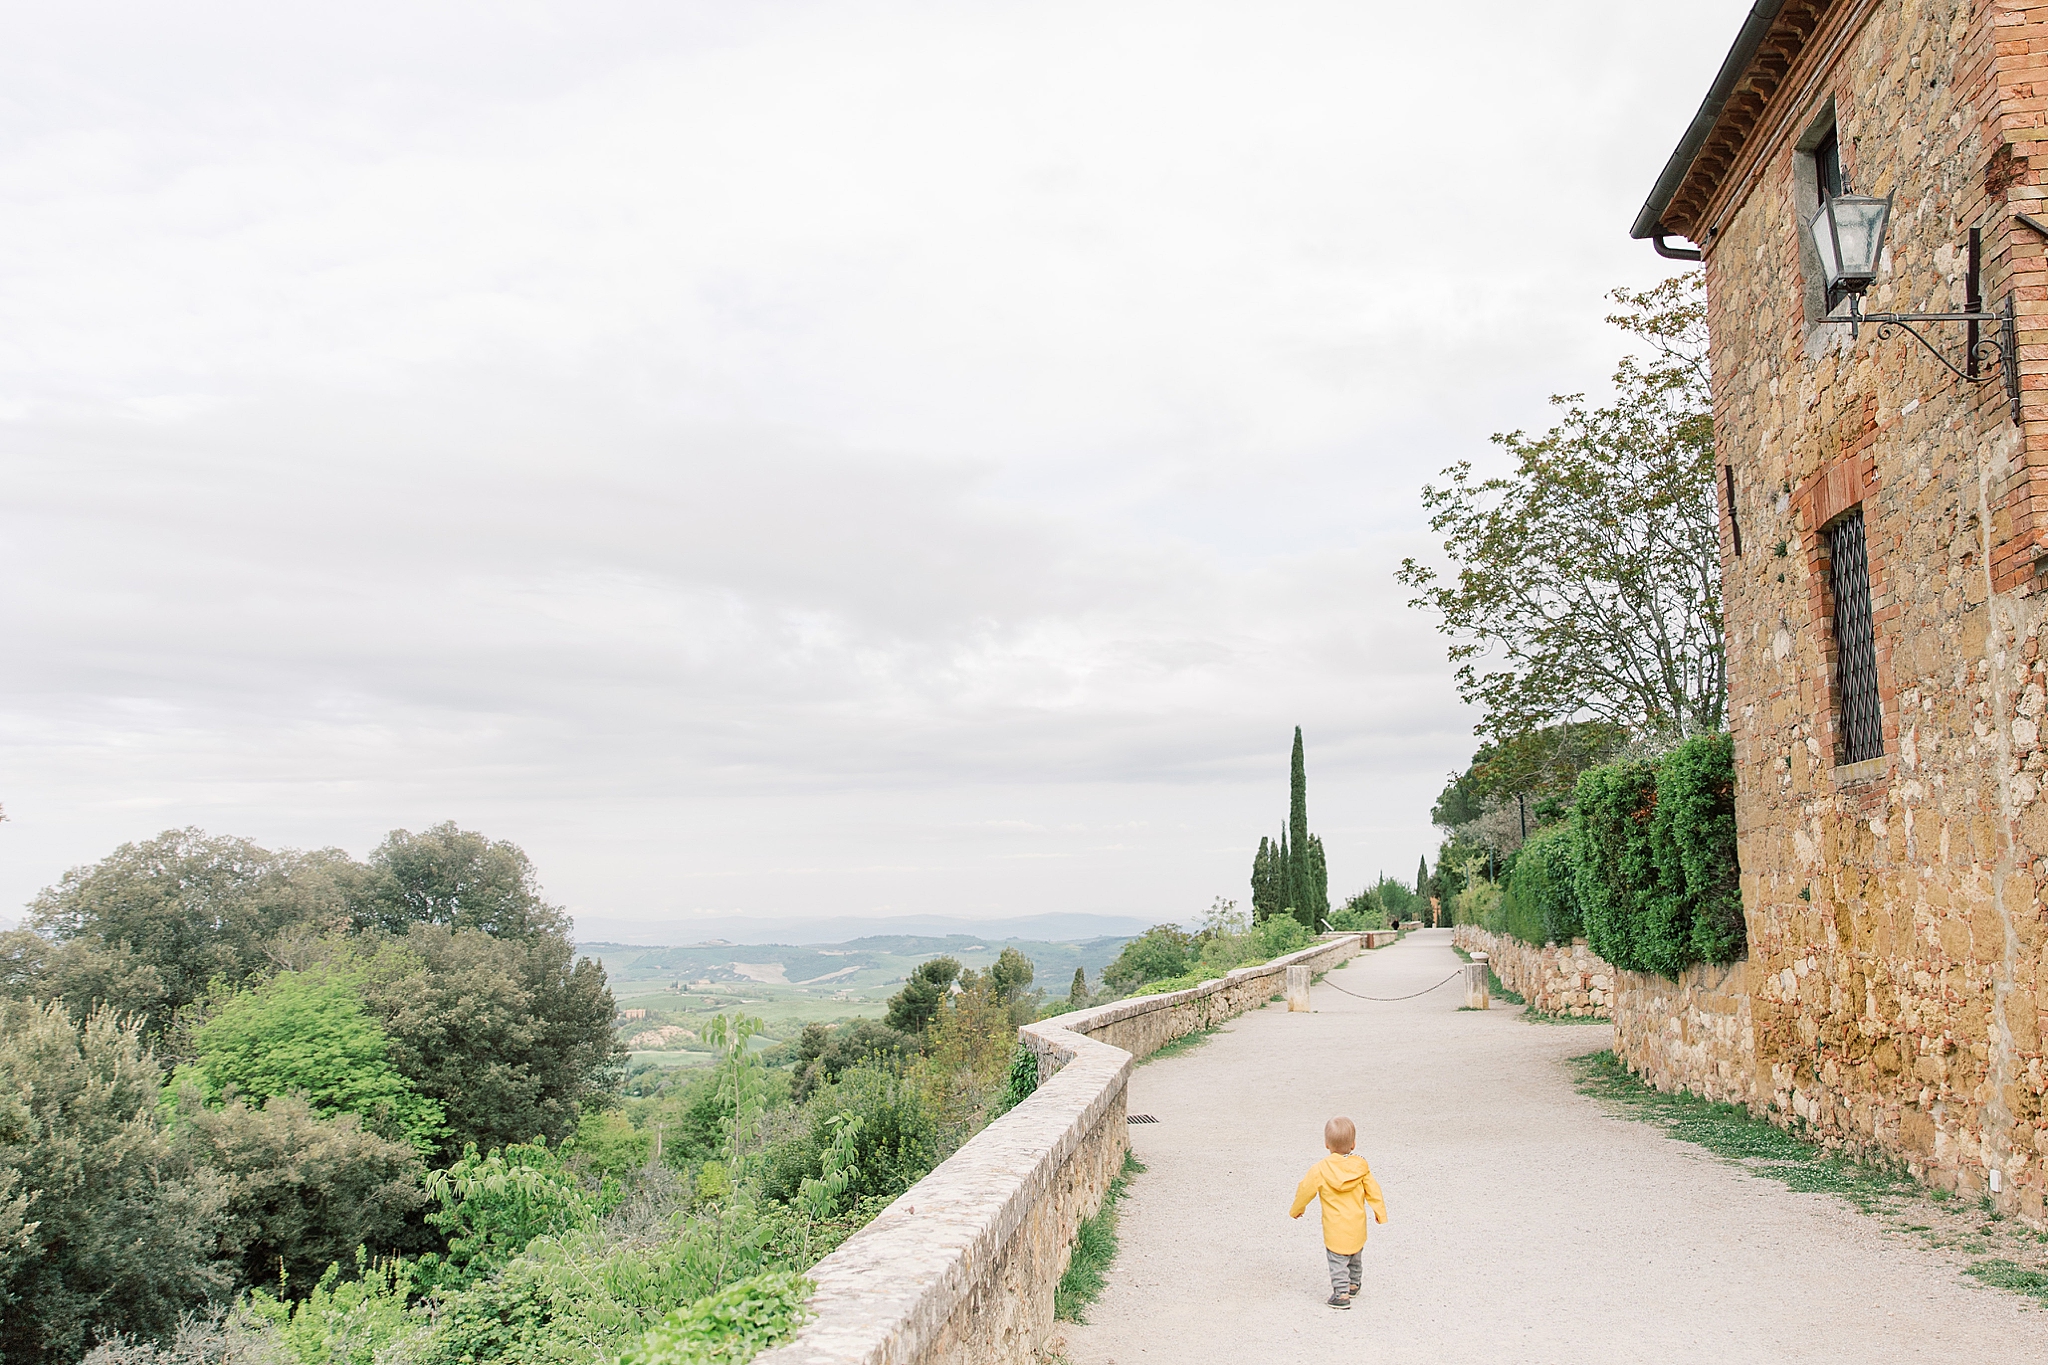 Destination wedding photographer, Alicia Lacey, travels to the heart of Tuscany, including San Gimignano, Volterra, Borgo Pignano, and the Val d'Orcia Region.